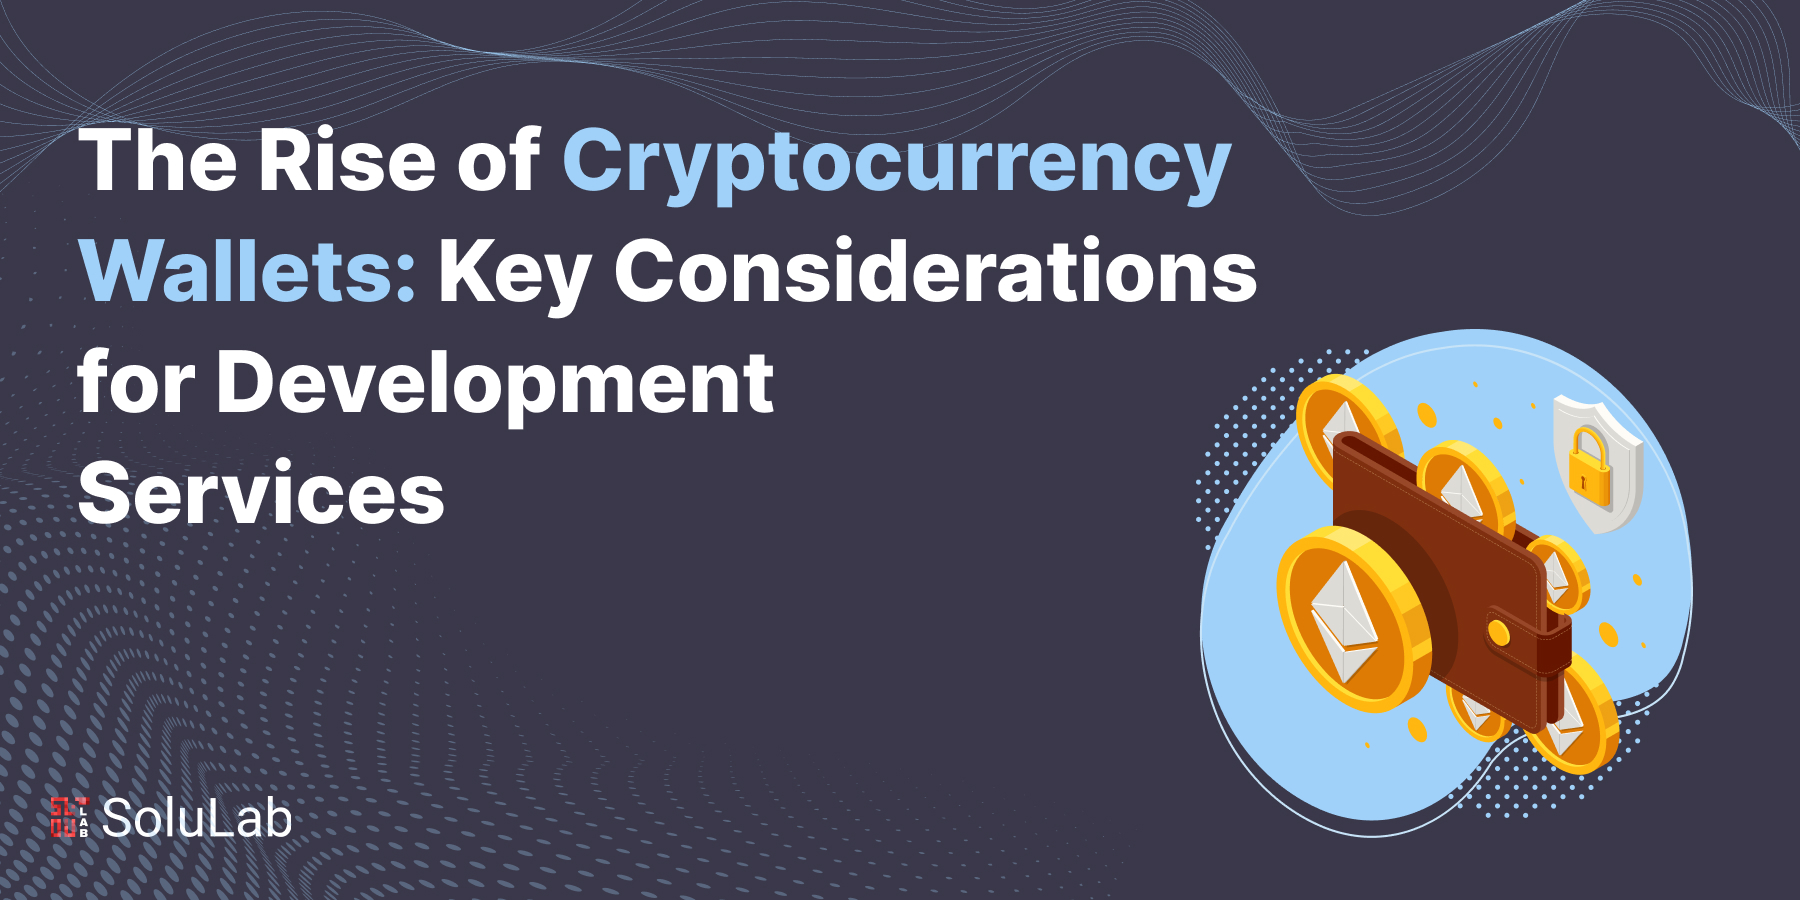 The Rise of Cryptocurrency Wallets: Key Considerations for Development Services 